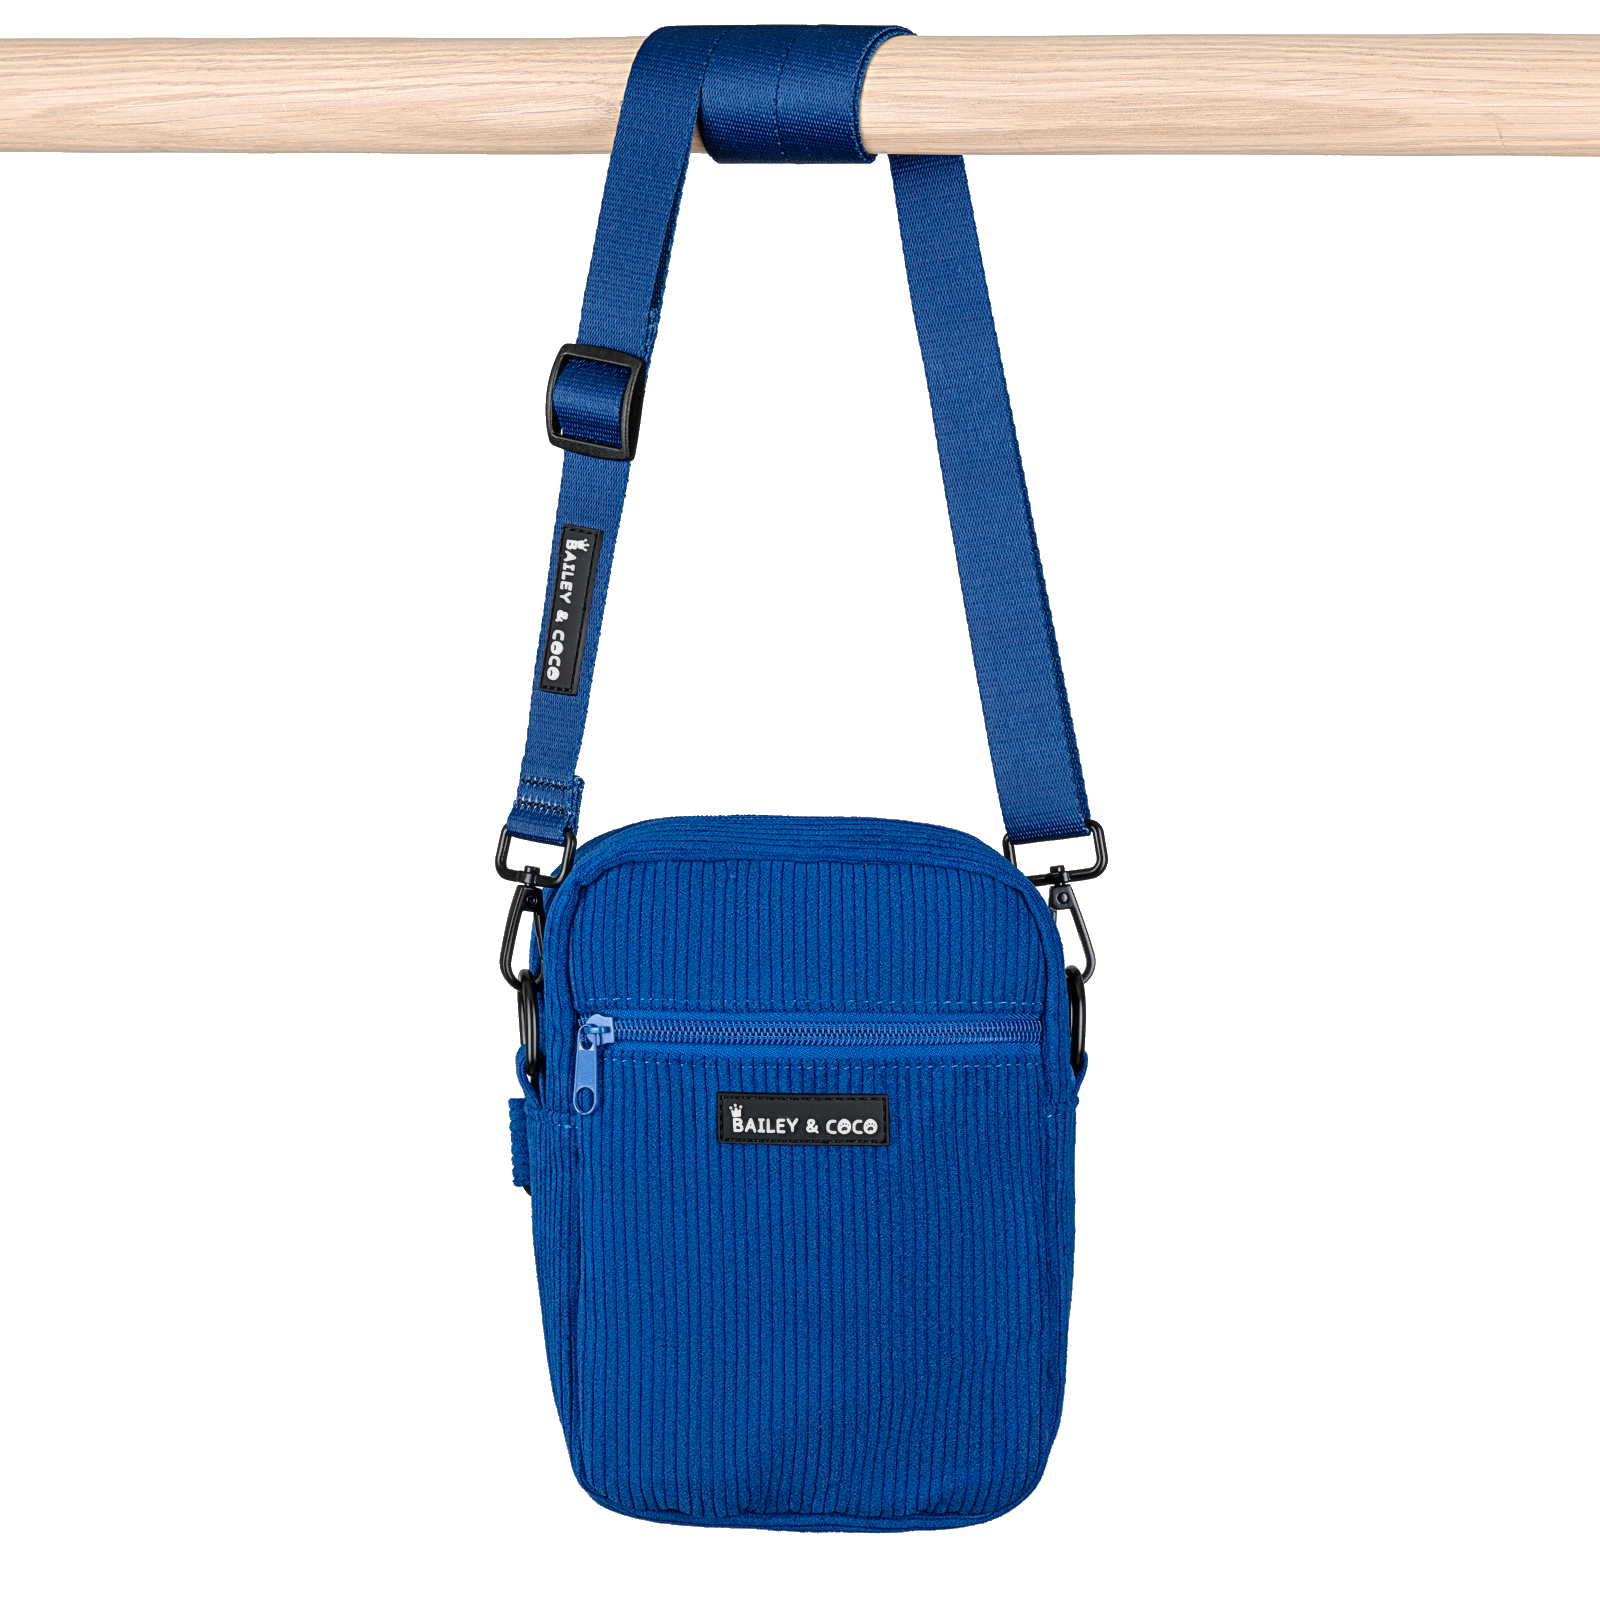 Dog Walking Bag with The Navy One Strap - Midnight Blue.